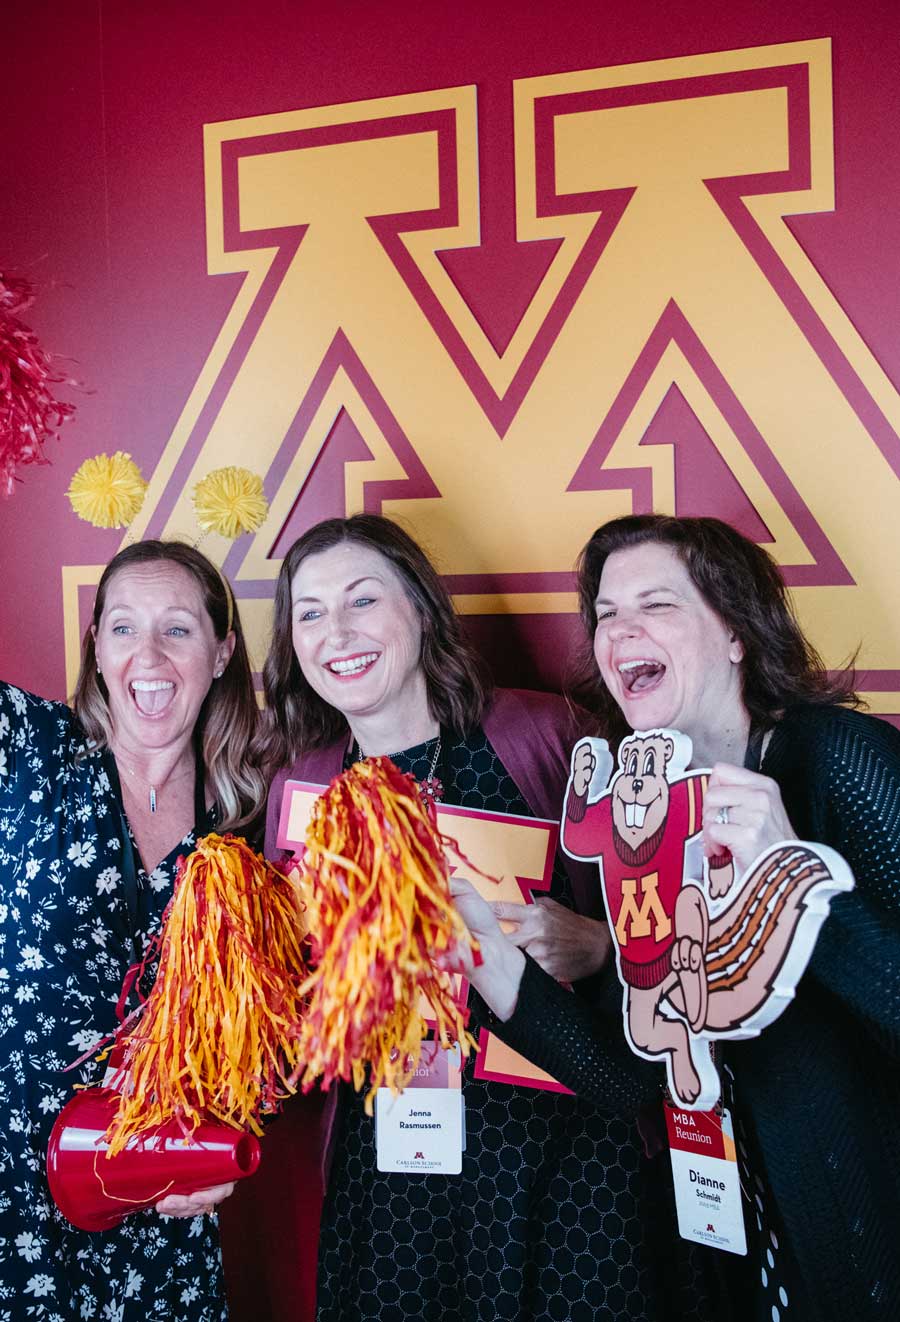 Three people pose for a photo in front of the "M" logo. They are holding props such as pompoms and a Goldy Gopher to show their school spirit.